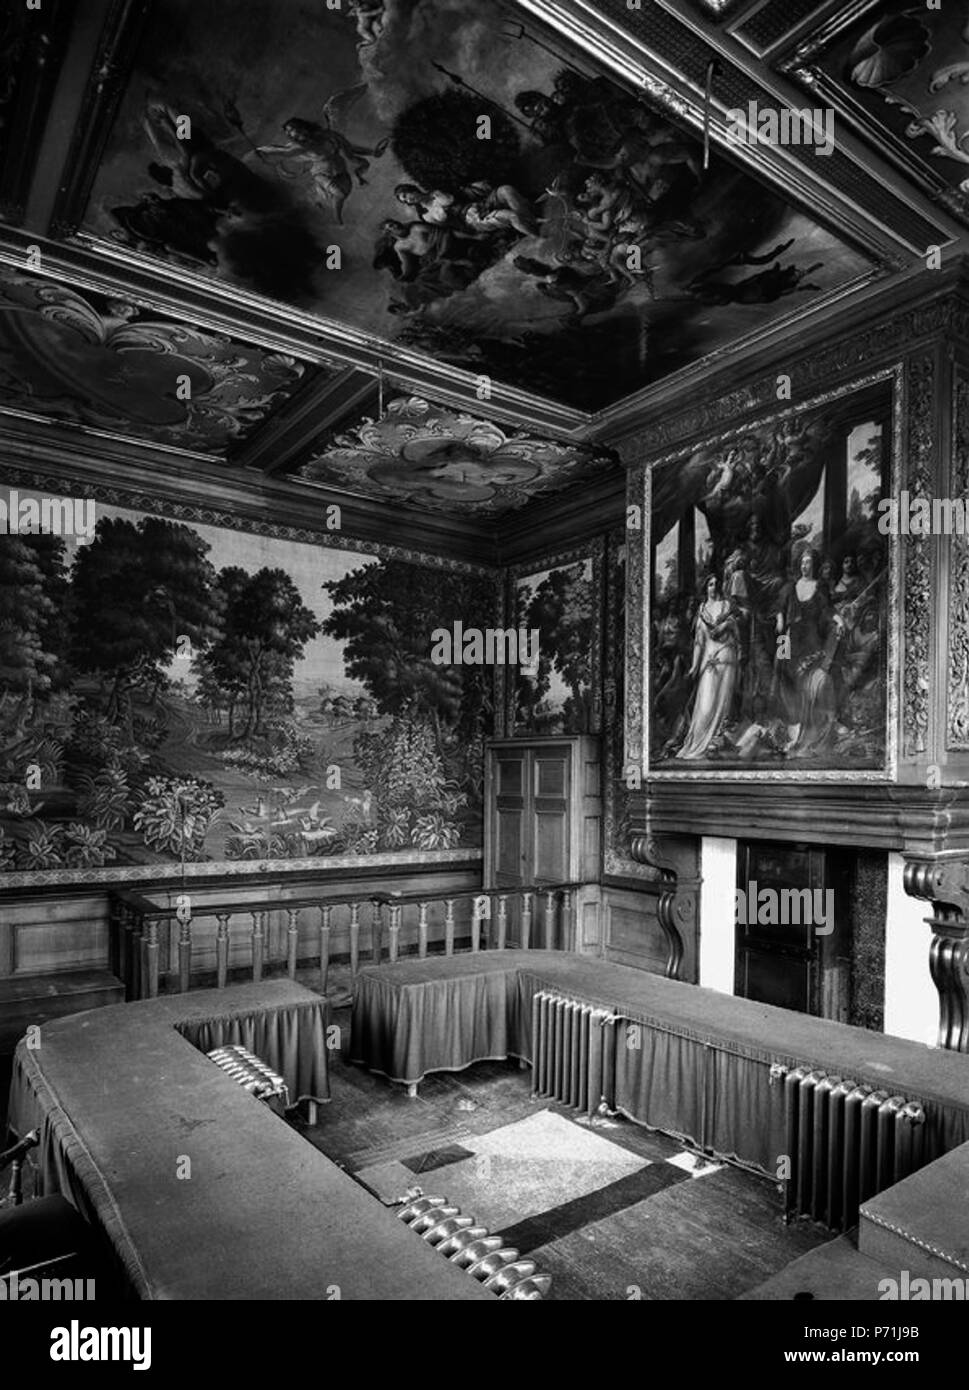 English: Maastricht, the Netherlands, town hall, so-called Collegekamer (formerly Council Chamber) with verdure tapestries, ordered in 1736 from François Guillaume van Verren in Oudenaarde (Belgium). Chimney piece by Theodore van der Schuer; ceiling paintings by J.B. Coclers, both early 18th c. (the latter replaced in 1965). Photo by G. de Hoog, 1915. . 4 December 2012, 01:50:52 14 Stadhuis Maastricht, Collegekamer, GdeHoog, 1915 Stock Photo